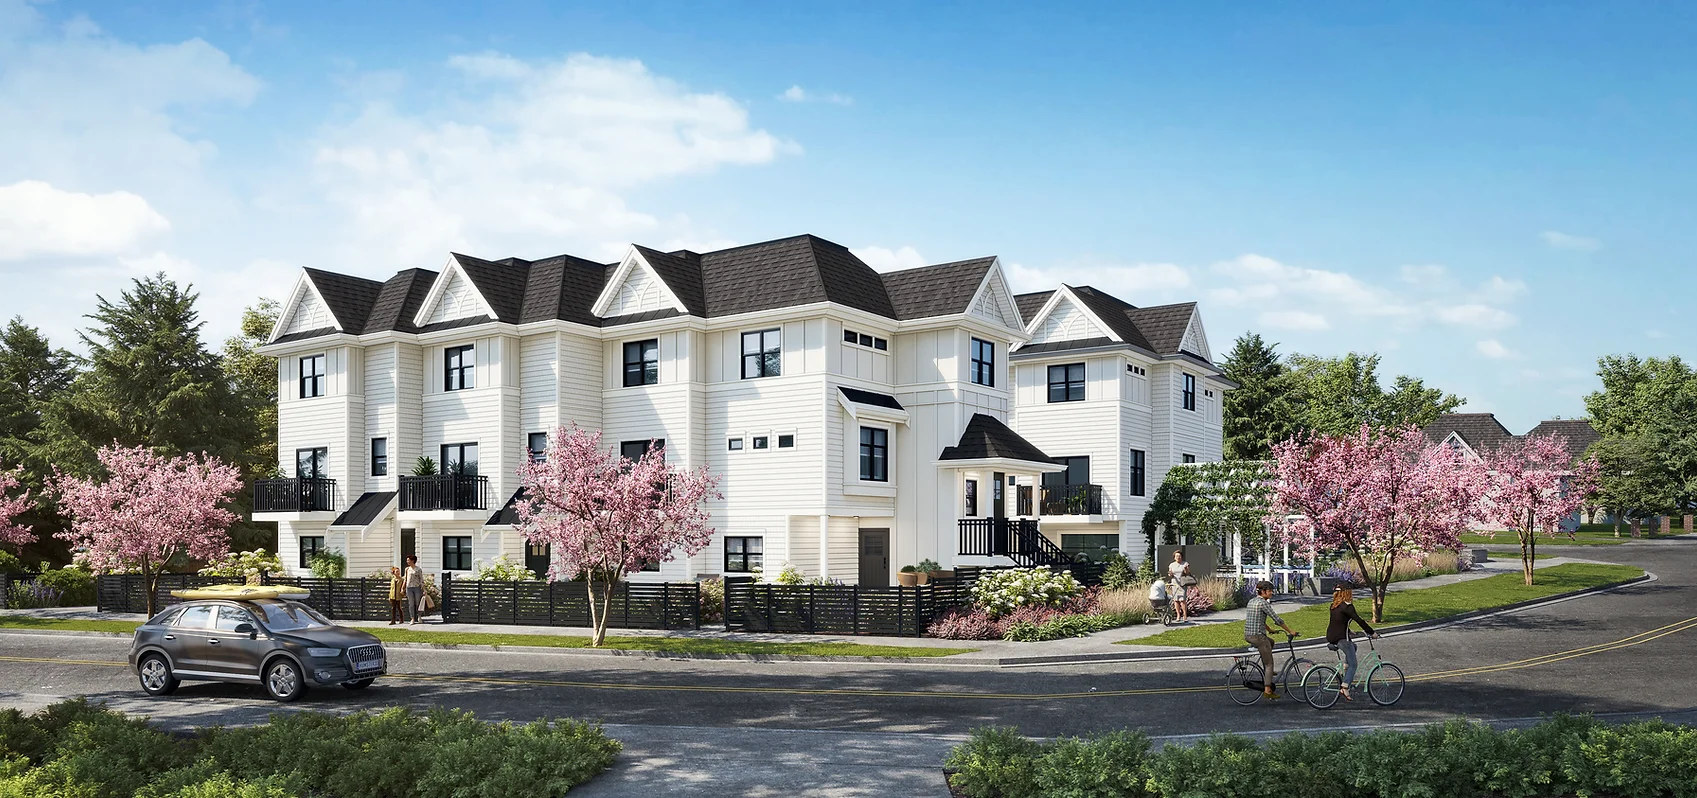 West Bay Crest is a boutique development by PACK Building & Technology and Long Term Developments.